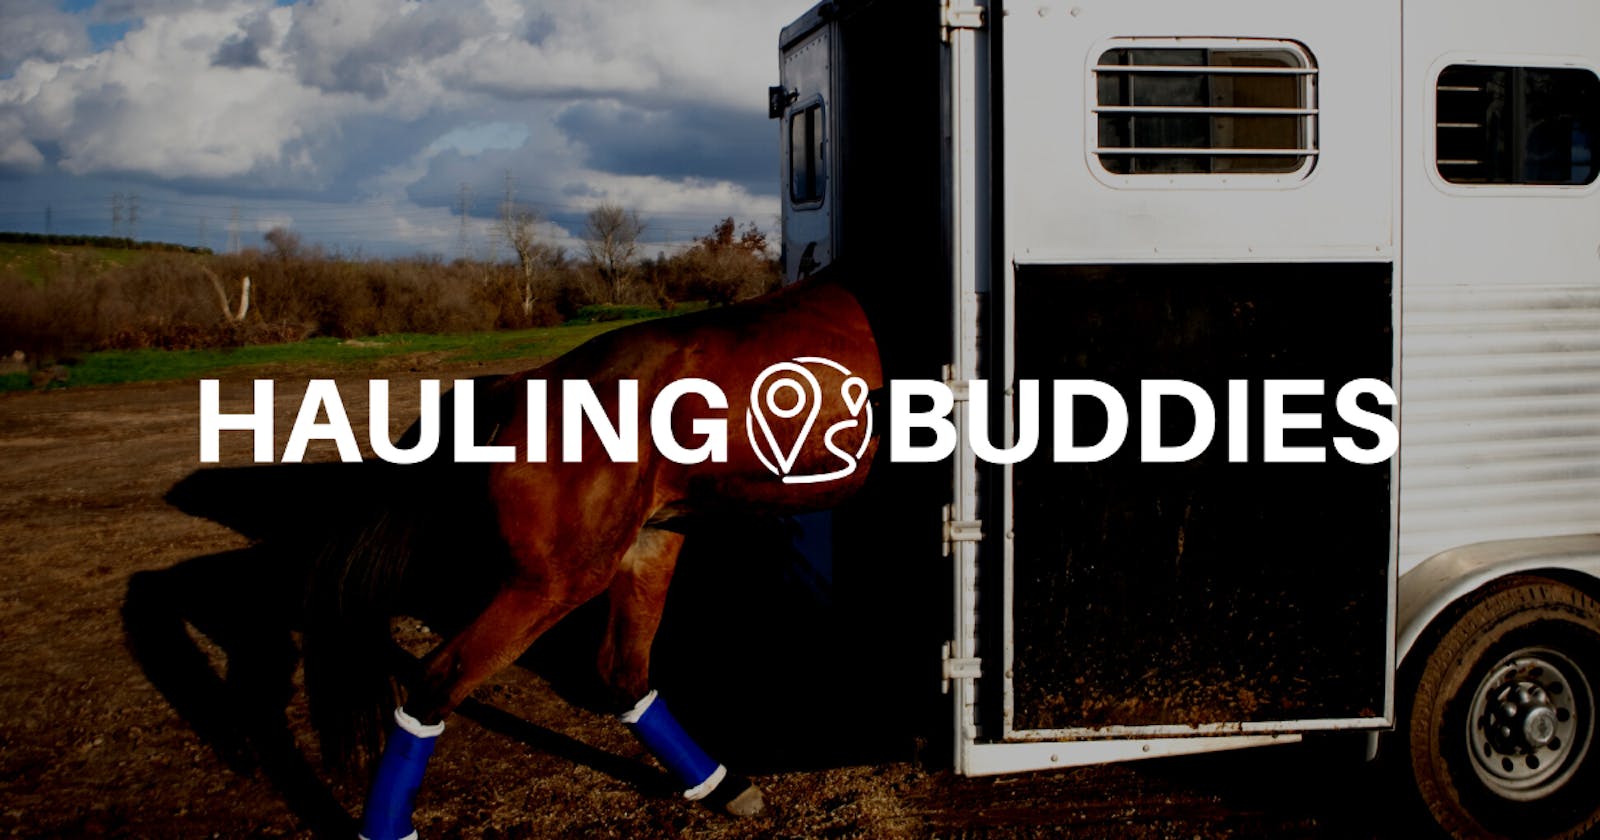 How to Choose the Right Horse Transport Company: Tips and Guidelines from Hauling Buddies